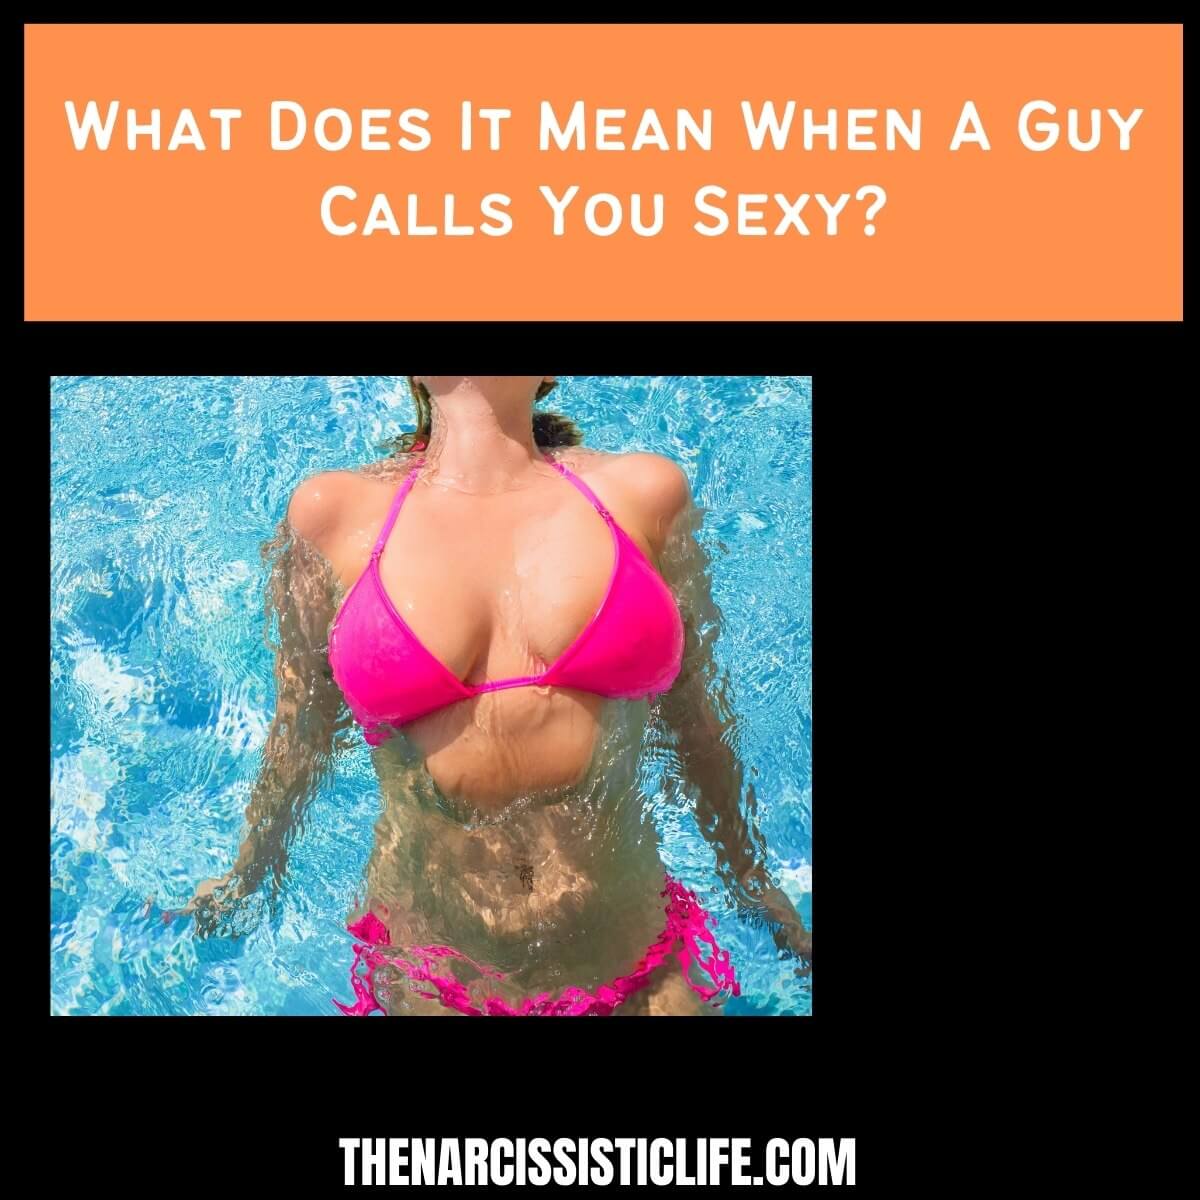 What Does It Mean When A Guy Calls You Sexy